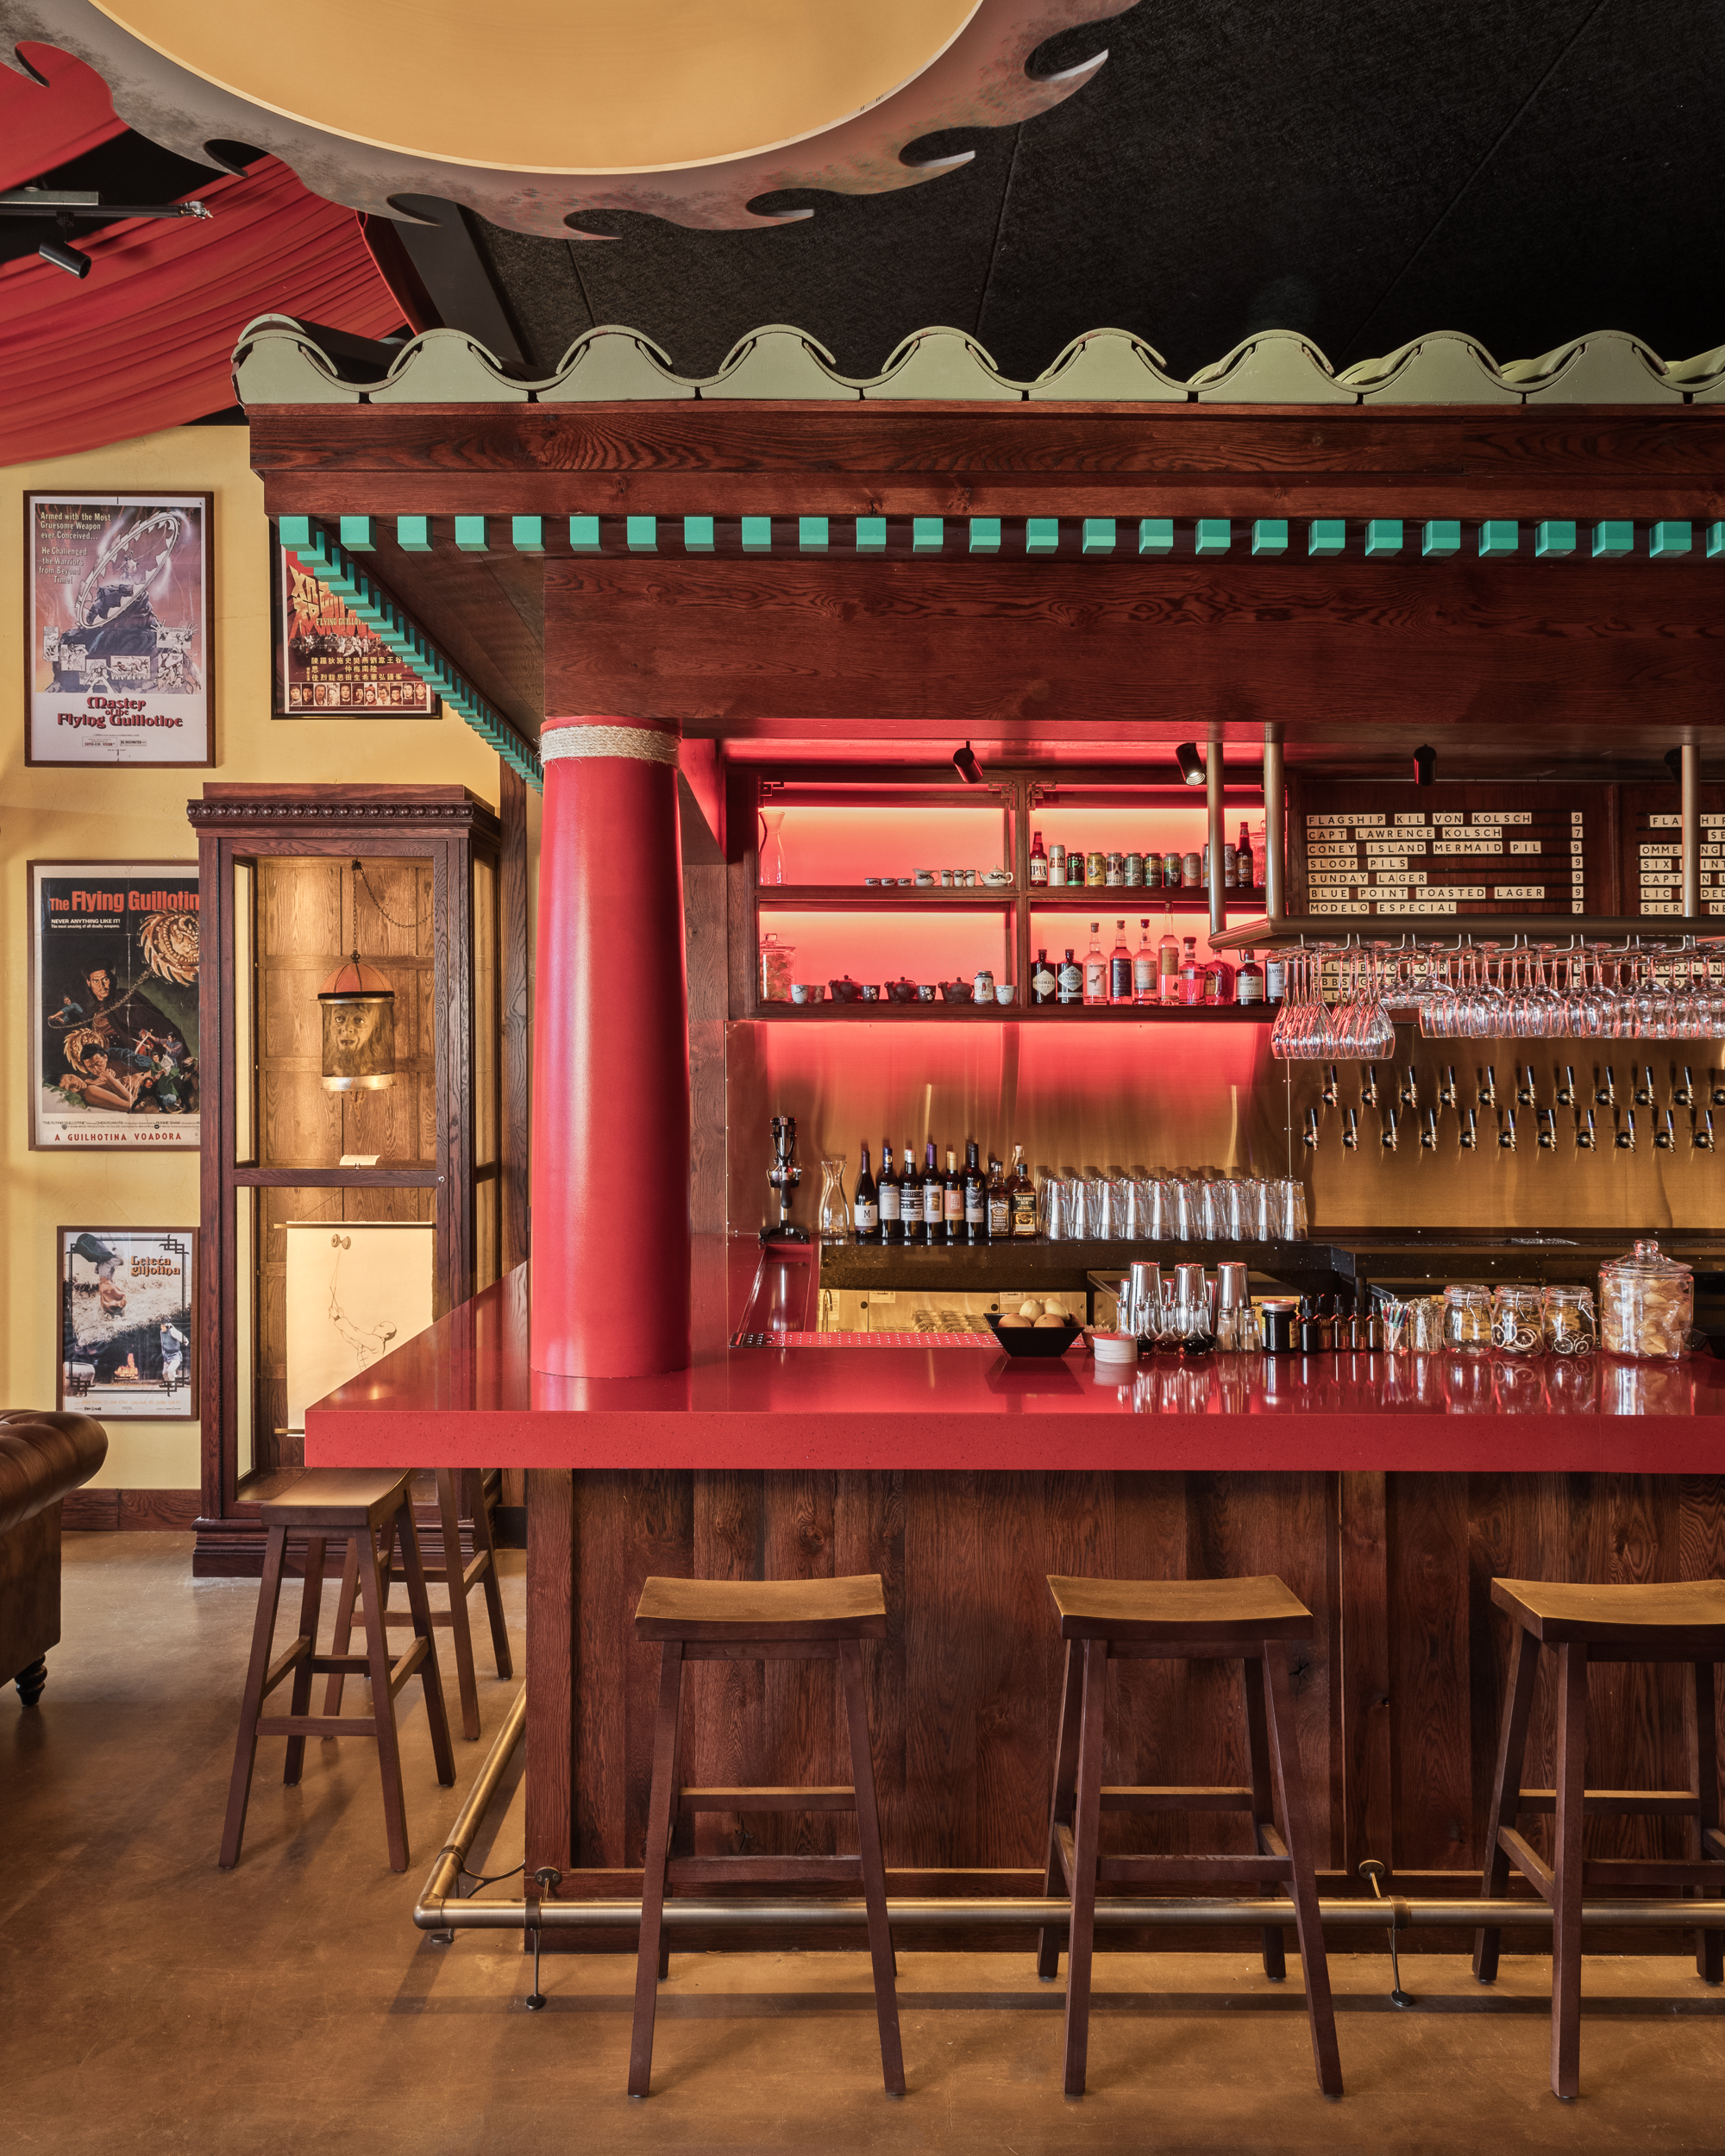 Front shot of a bar corner with red columns and countertops, wooden paneling, and a wooden top section with green trim and light green roofing. Hanging above the bar is the edge of a flying guillotine, as seen in the movie Master of The Flying Guillotine, hung from the ceiling. The bar corner is surrounded by wooden stools with square seats.  Behind the bar counter are clean glasses hung upside-down and several bottles of spirits/liquors. The walls are a yellow off-white color that have wooden paneling and a chair rail. On the wall to the right of the bar are a few posters for Master of The Flying Guillotine and a (hopefully fake) decapitated head hanging from a chain inside a wooden case.